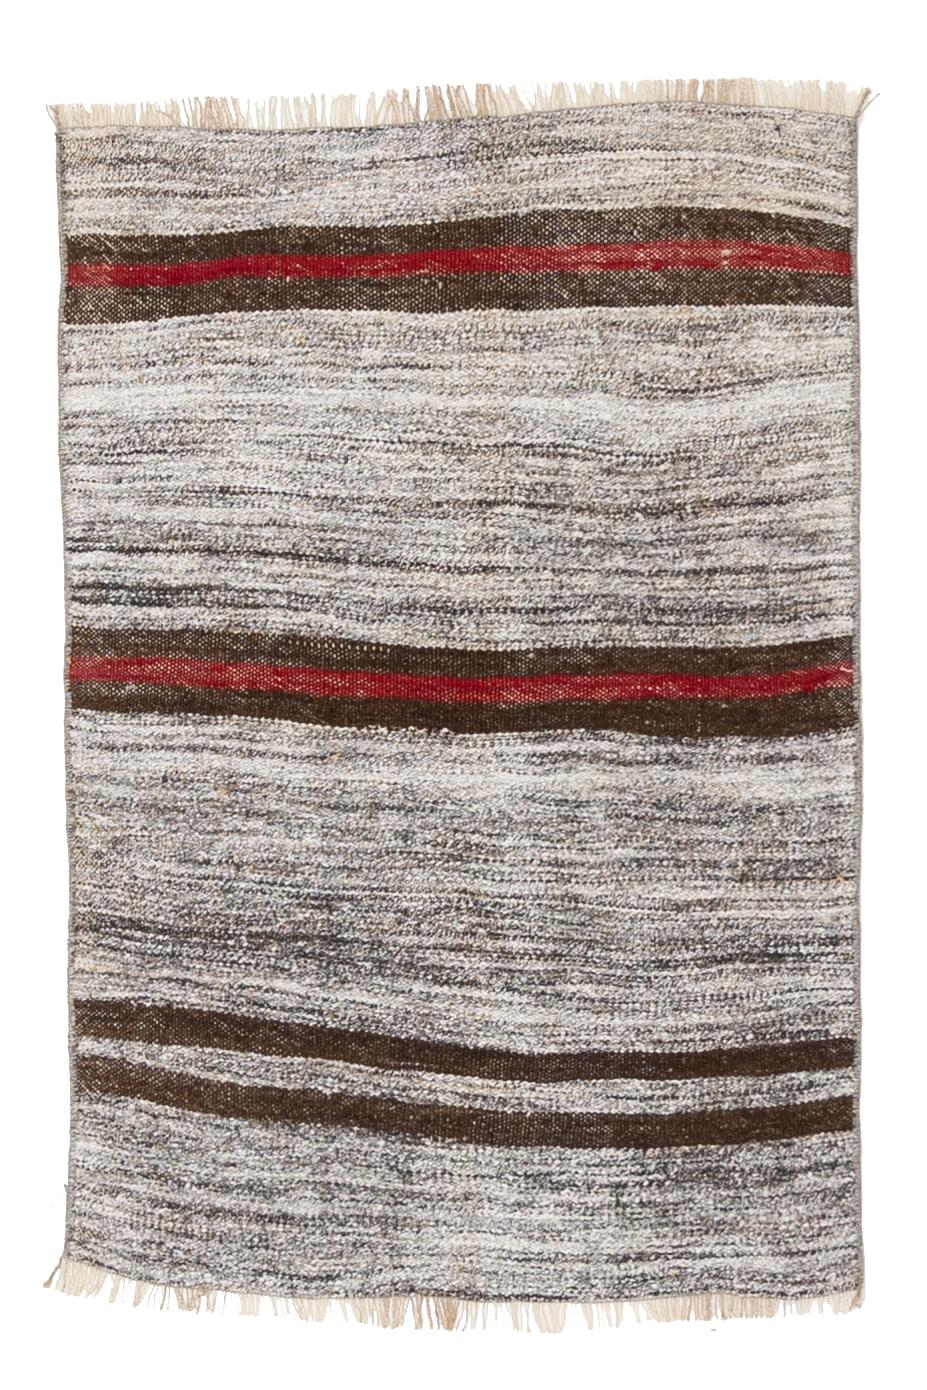 Age: Circa 1950

Colors: Striated grays, chocolate brown, cherry red

Pile: flatwovern

Wear Notes: 1

Material: Goat hair, hemp.

We love the organic feel of the striated grays and wabi-sabi stripes. The perfect way to add a little pop of color to